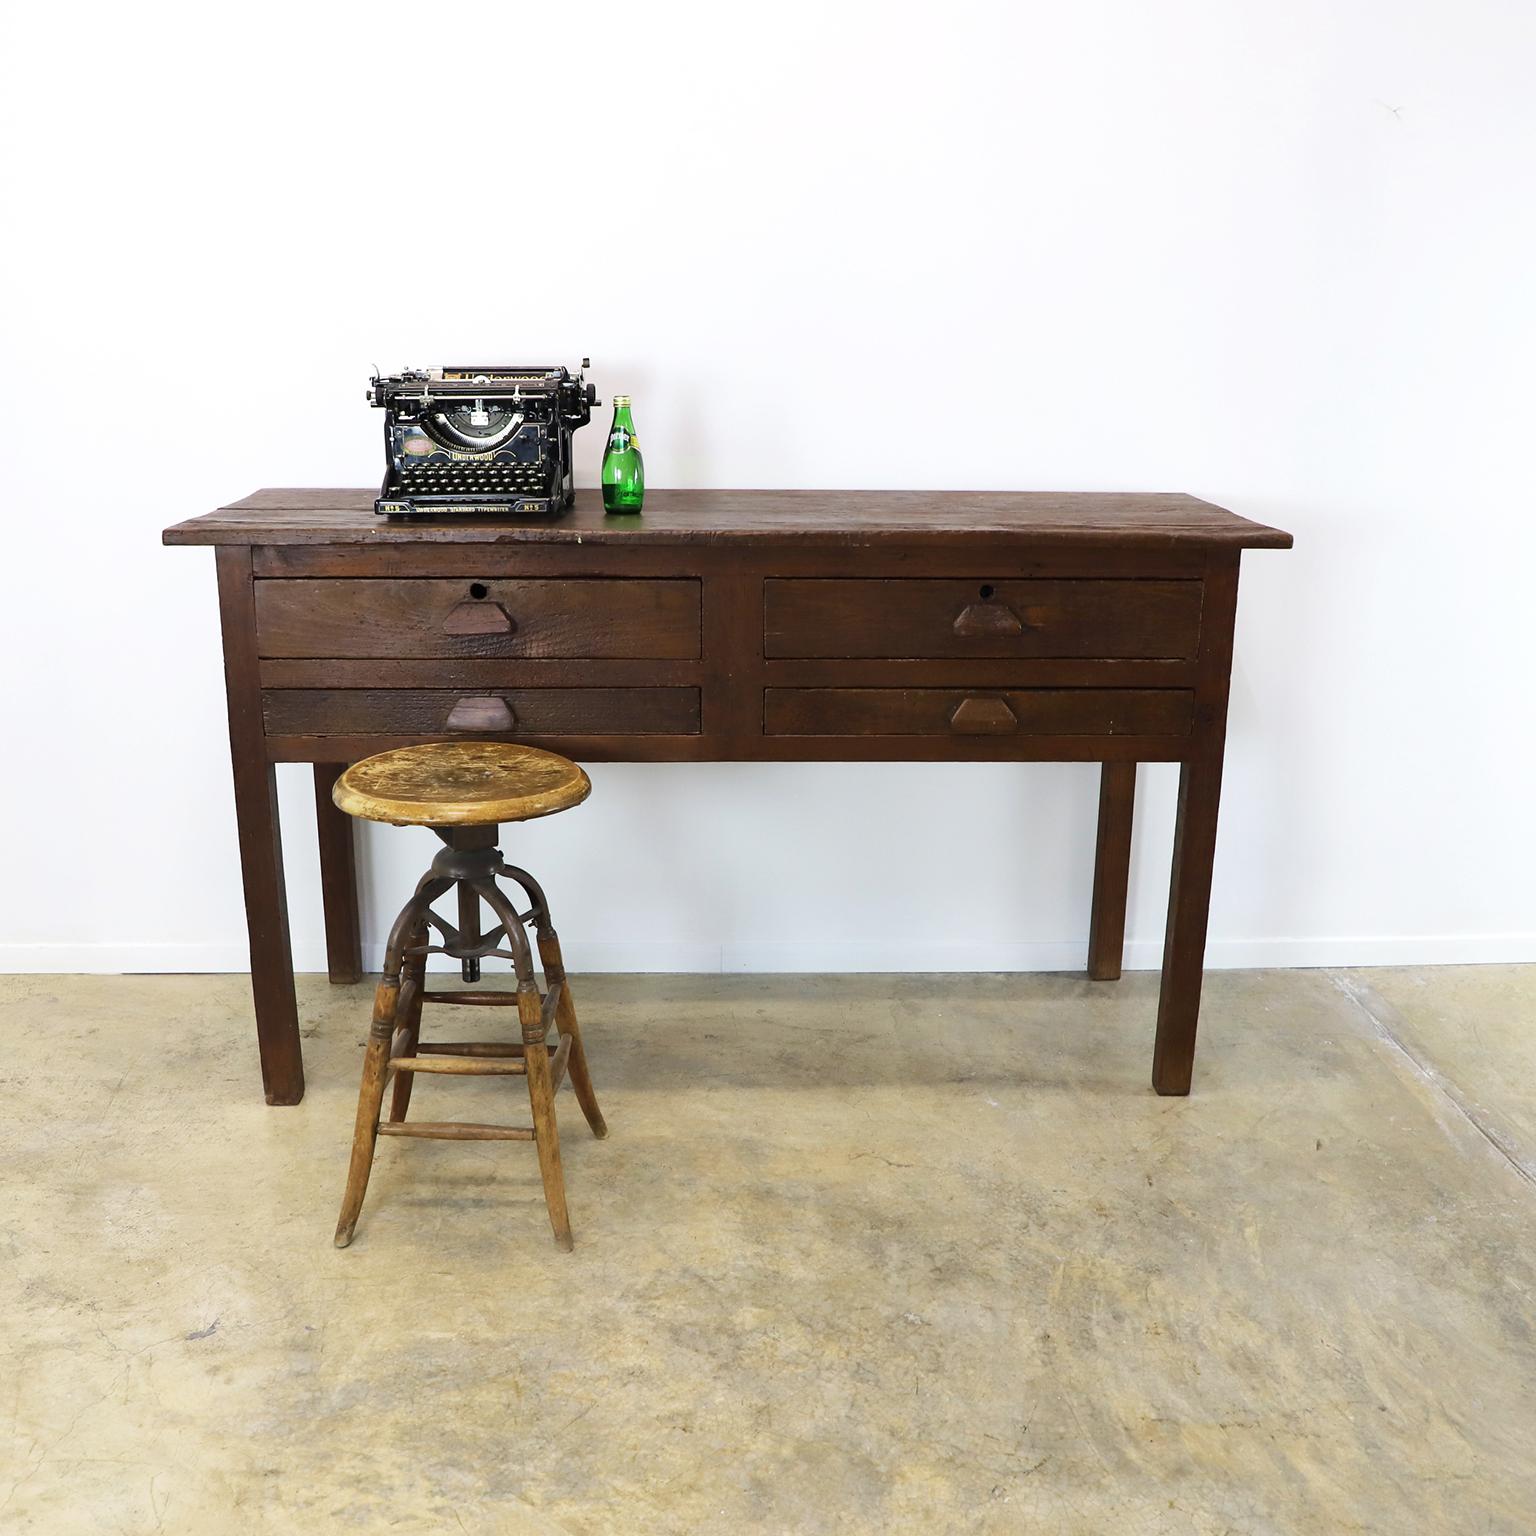 Antique Industrial Jeweler's Bench Work Table In Distressed Condition For Sale In Mexico City, CDMX